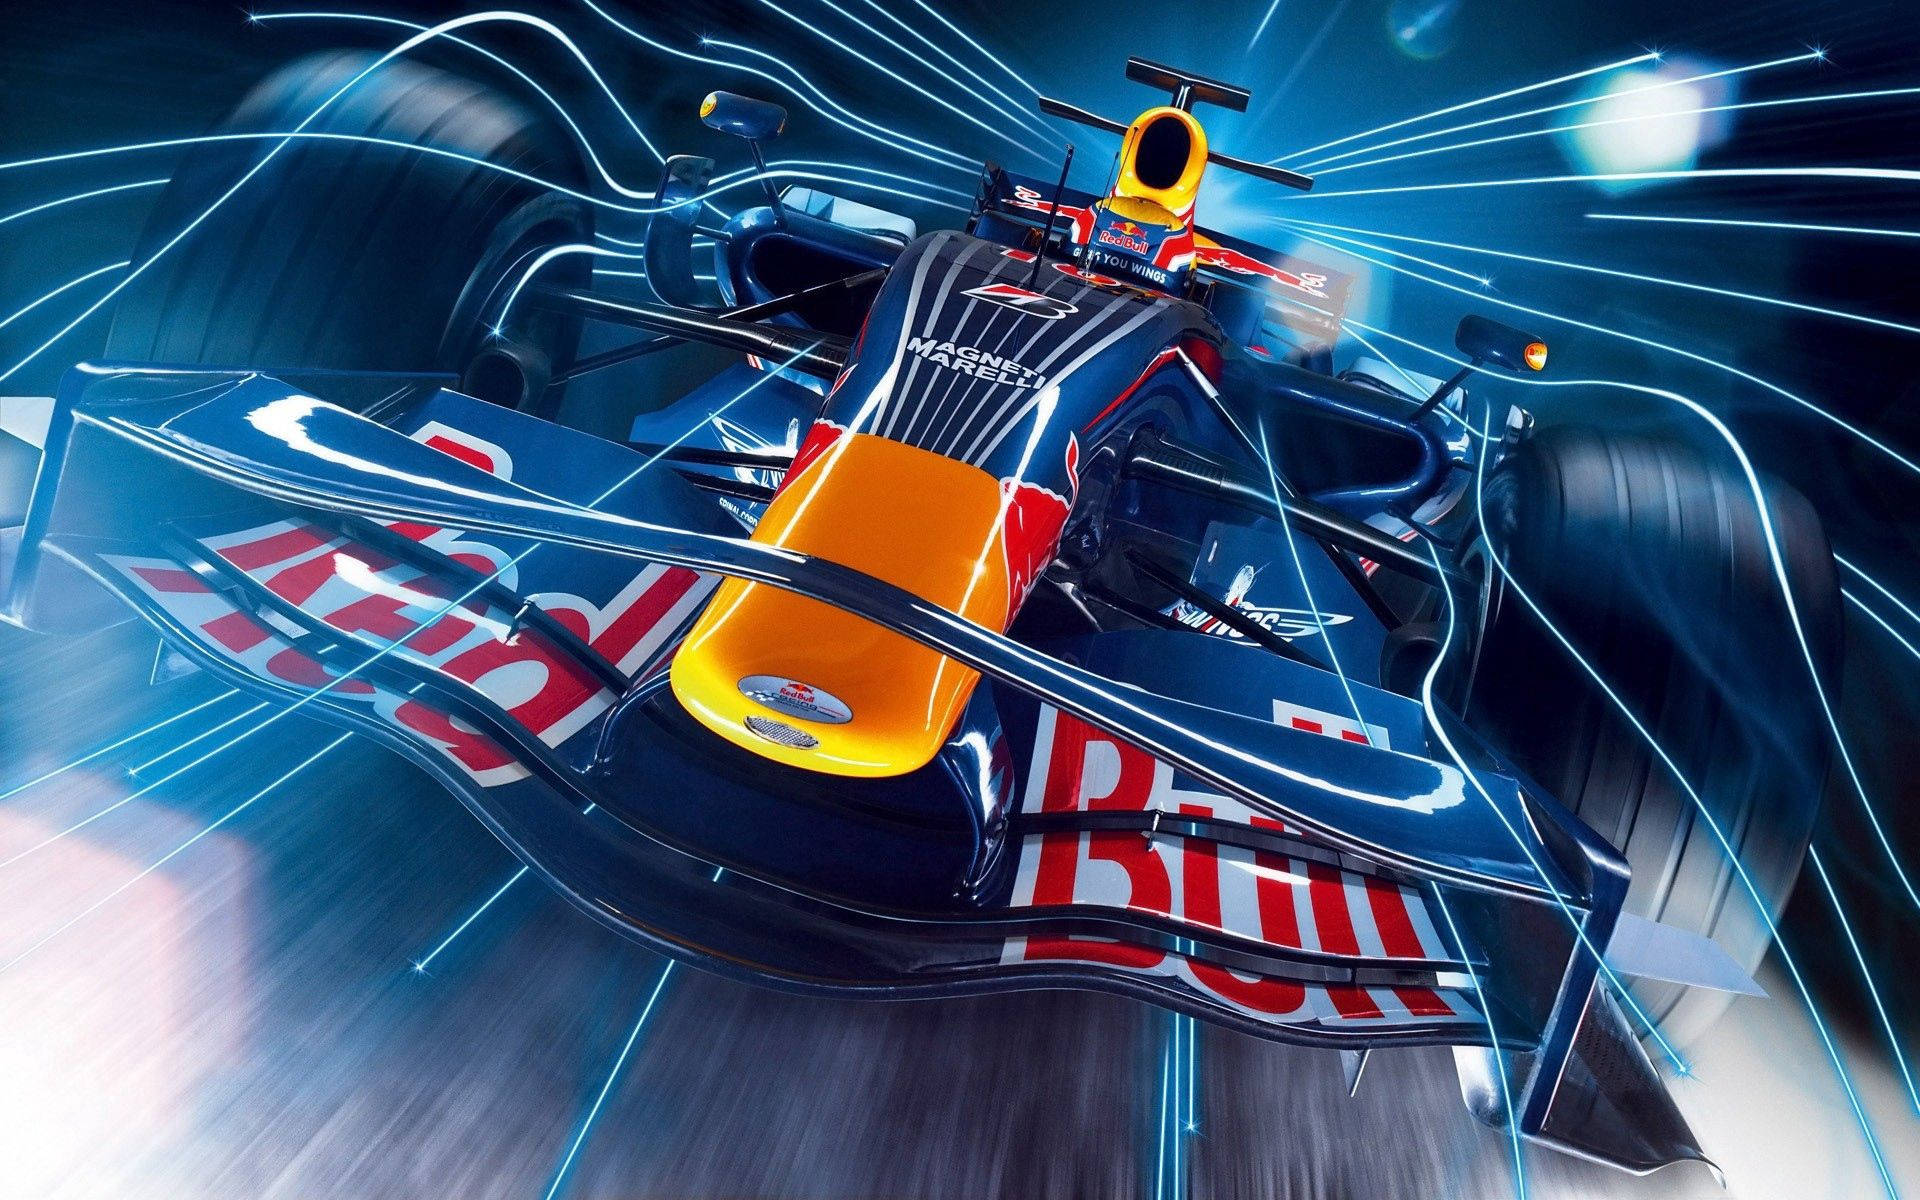 Dynamic Energy - Red Bull In Action